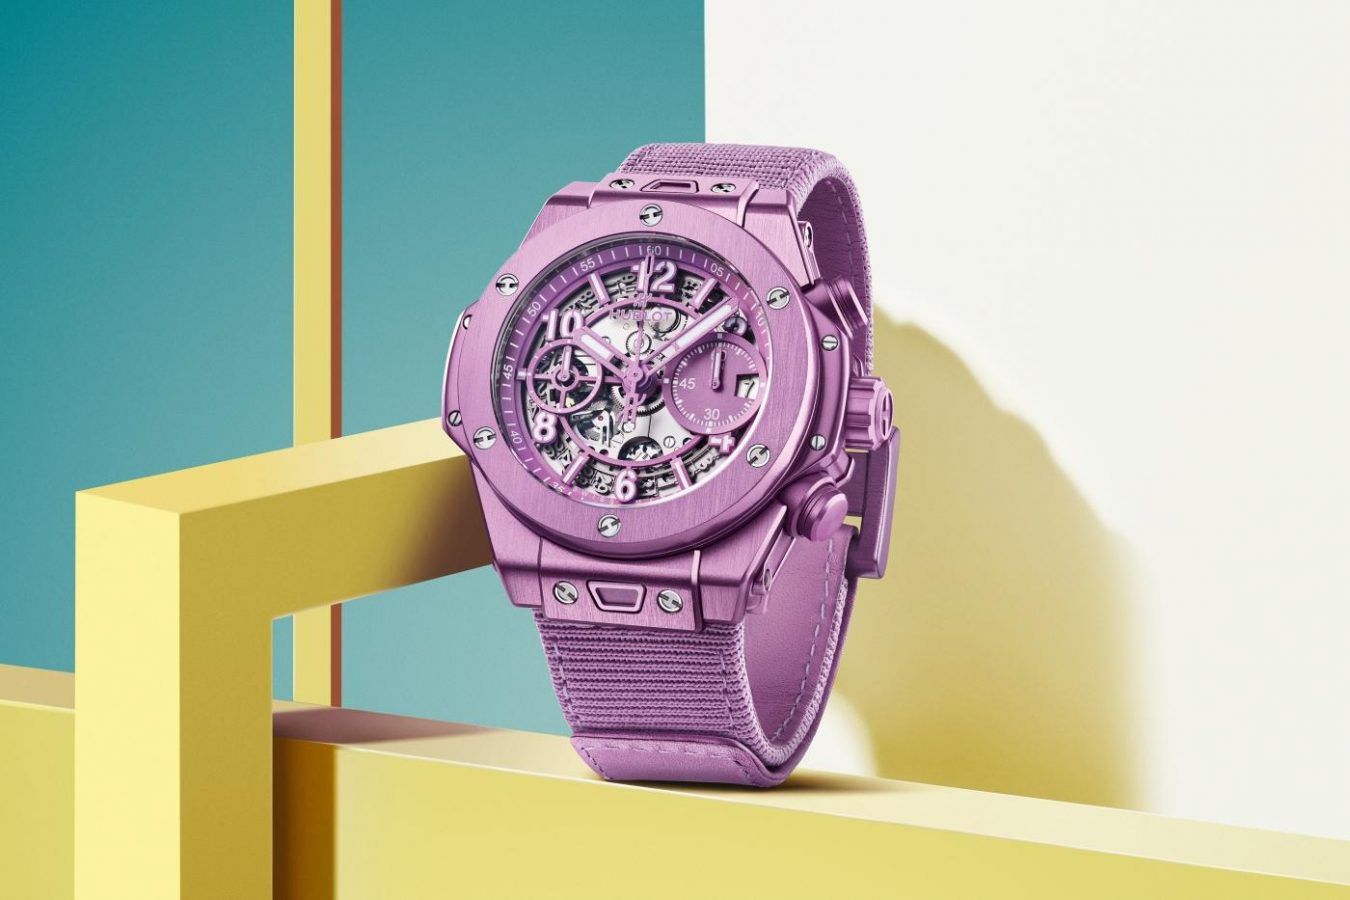 Hublot dives onto an all-purple look with its Big Bang Unico Summer Purple